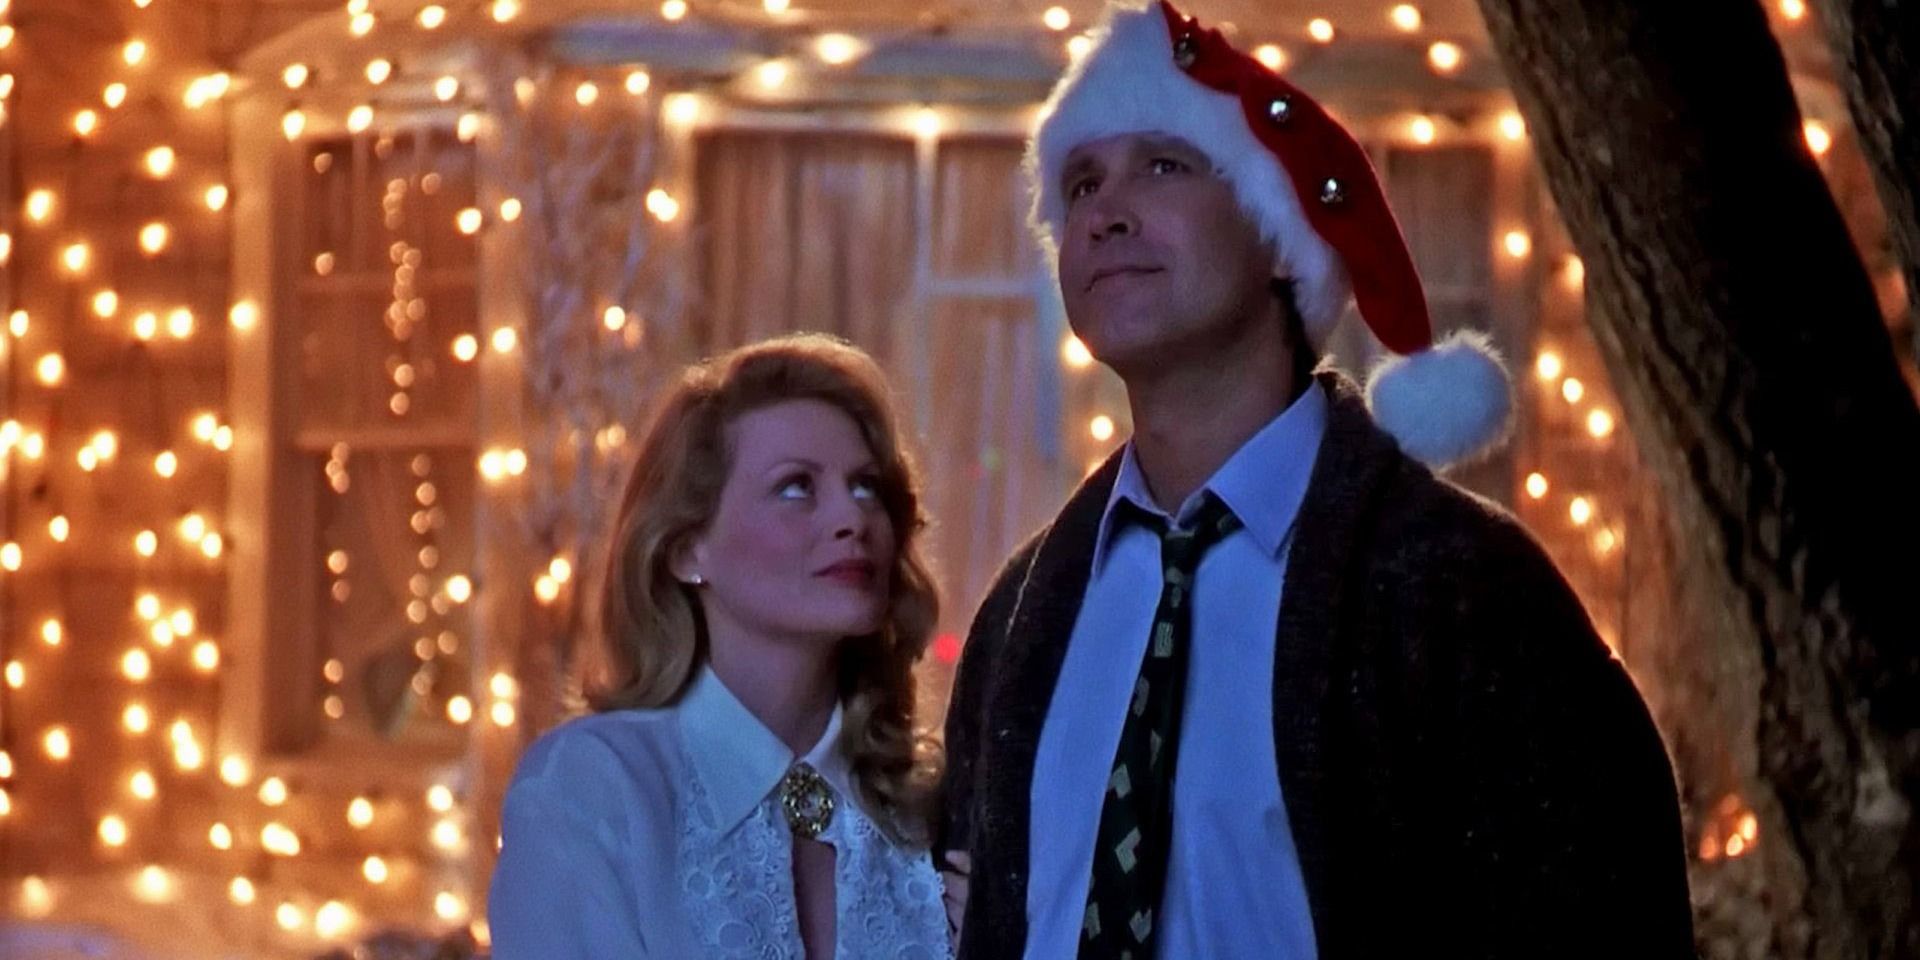 10 Christmas Movies For Fans Of Home Alone